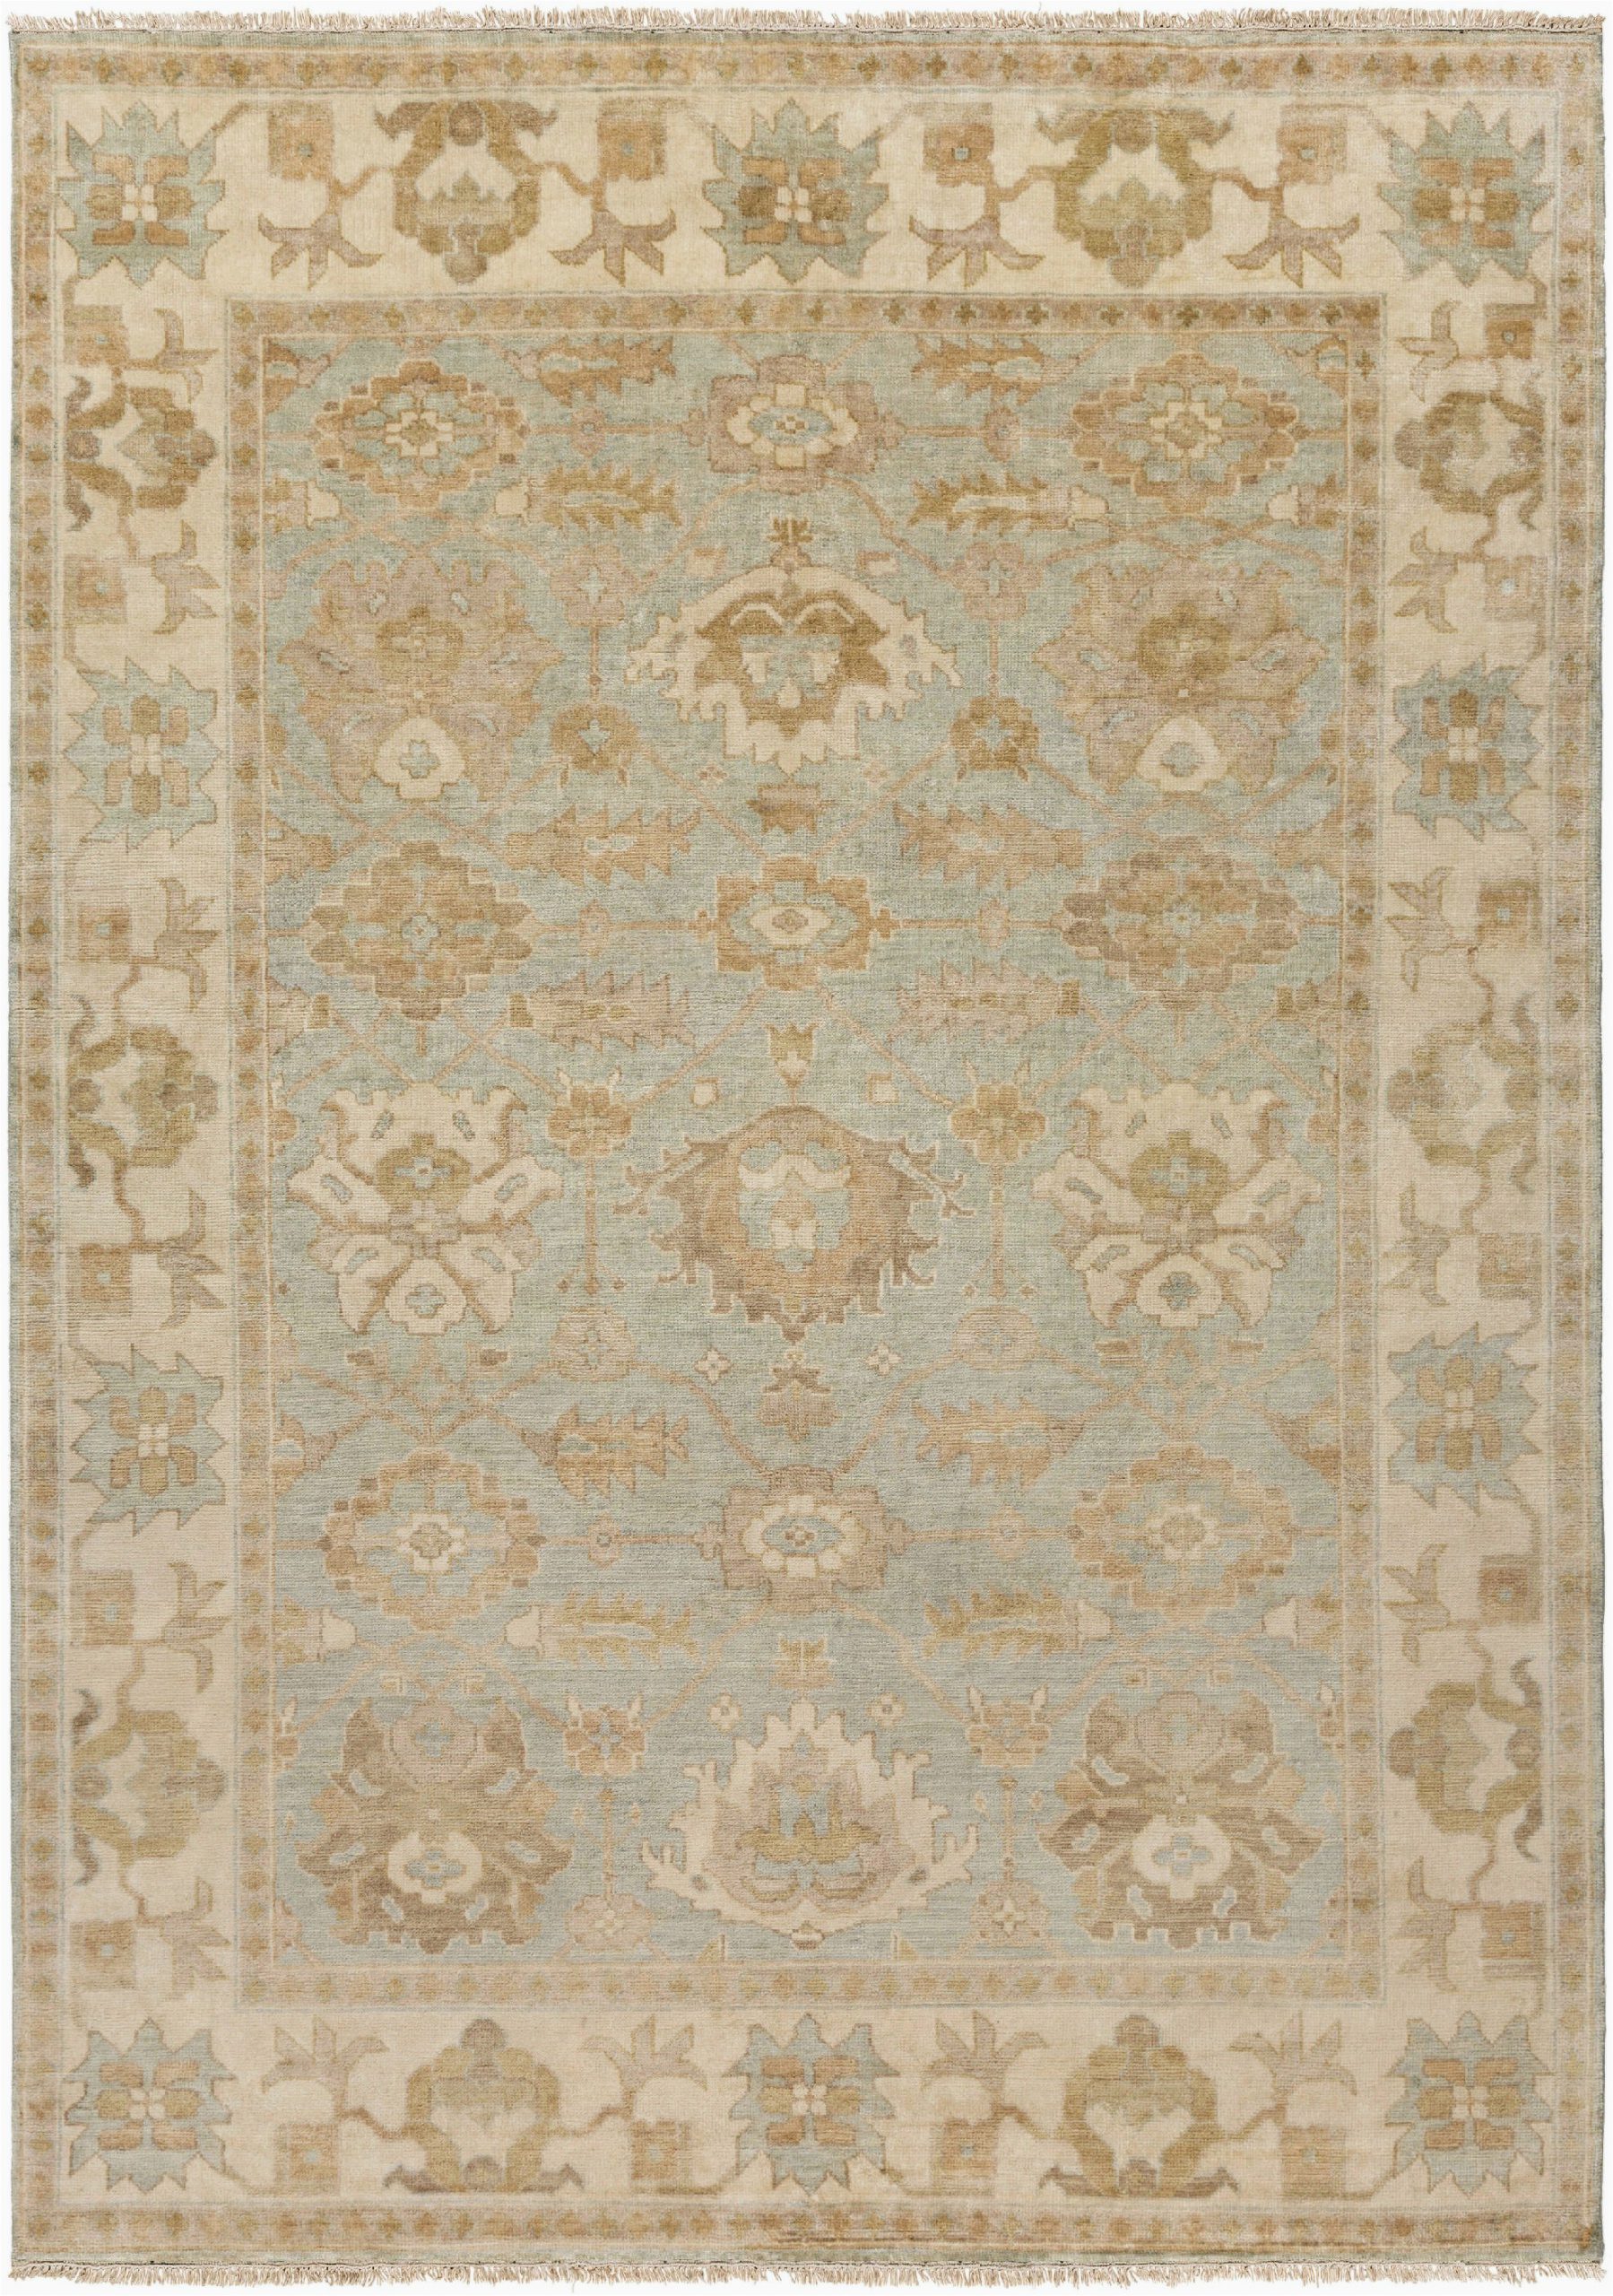 11 by 11 area Rug Surya Floor Coverings Hillcrest 8 X 11 area Rug Sryhil Walter E Smithe Furniture Design